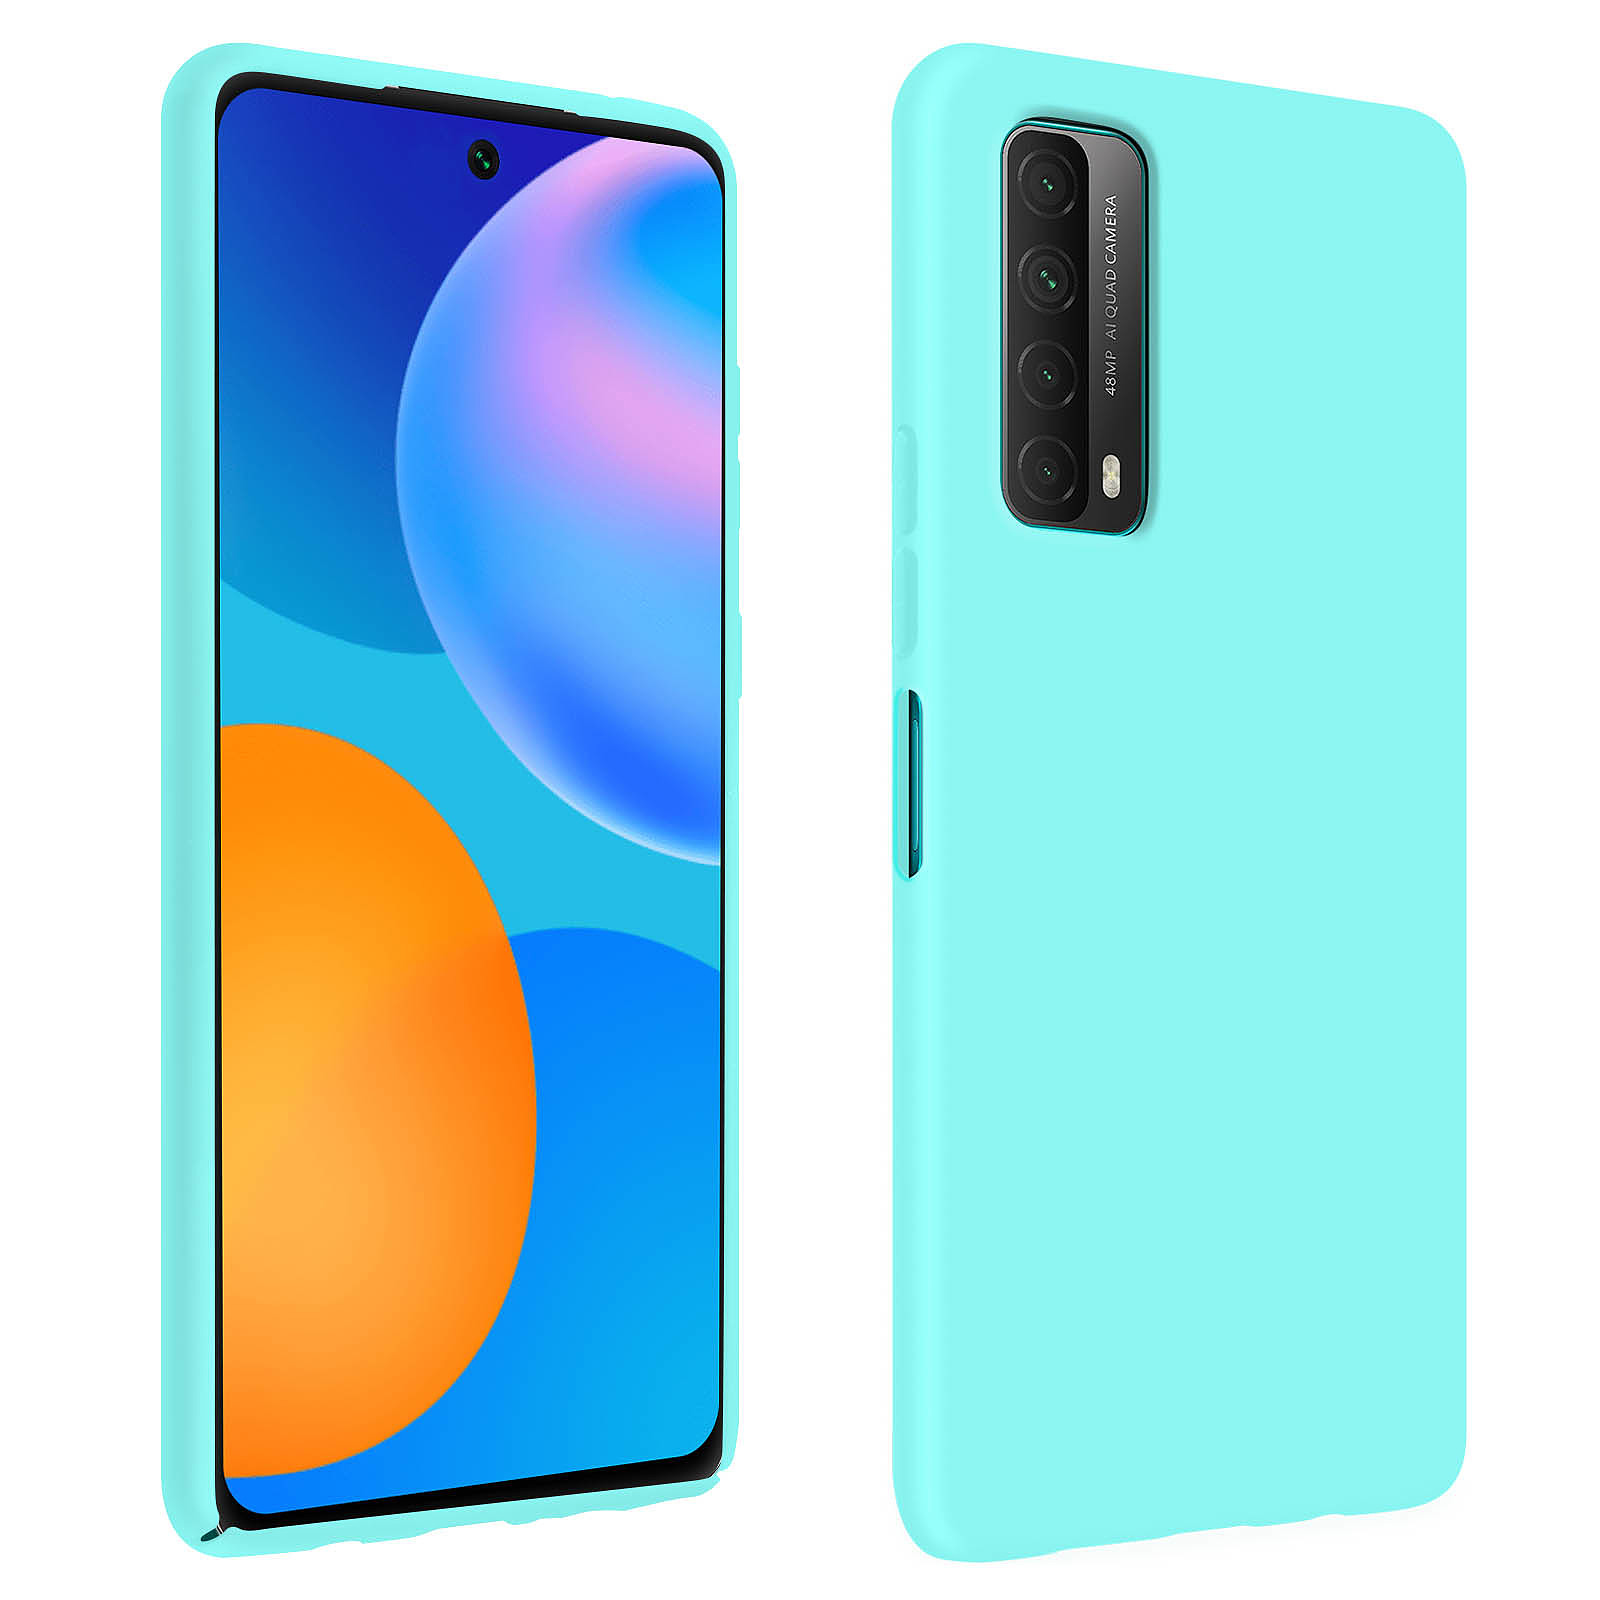 Avizar Coque pour Huawei P smart 2021 Silicone Gel Souple Finition Soft Touch Turquoise - Coque telephone Avizar